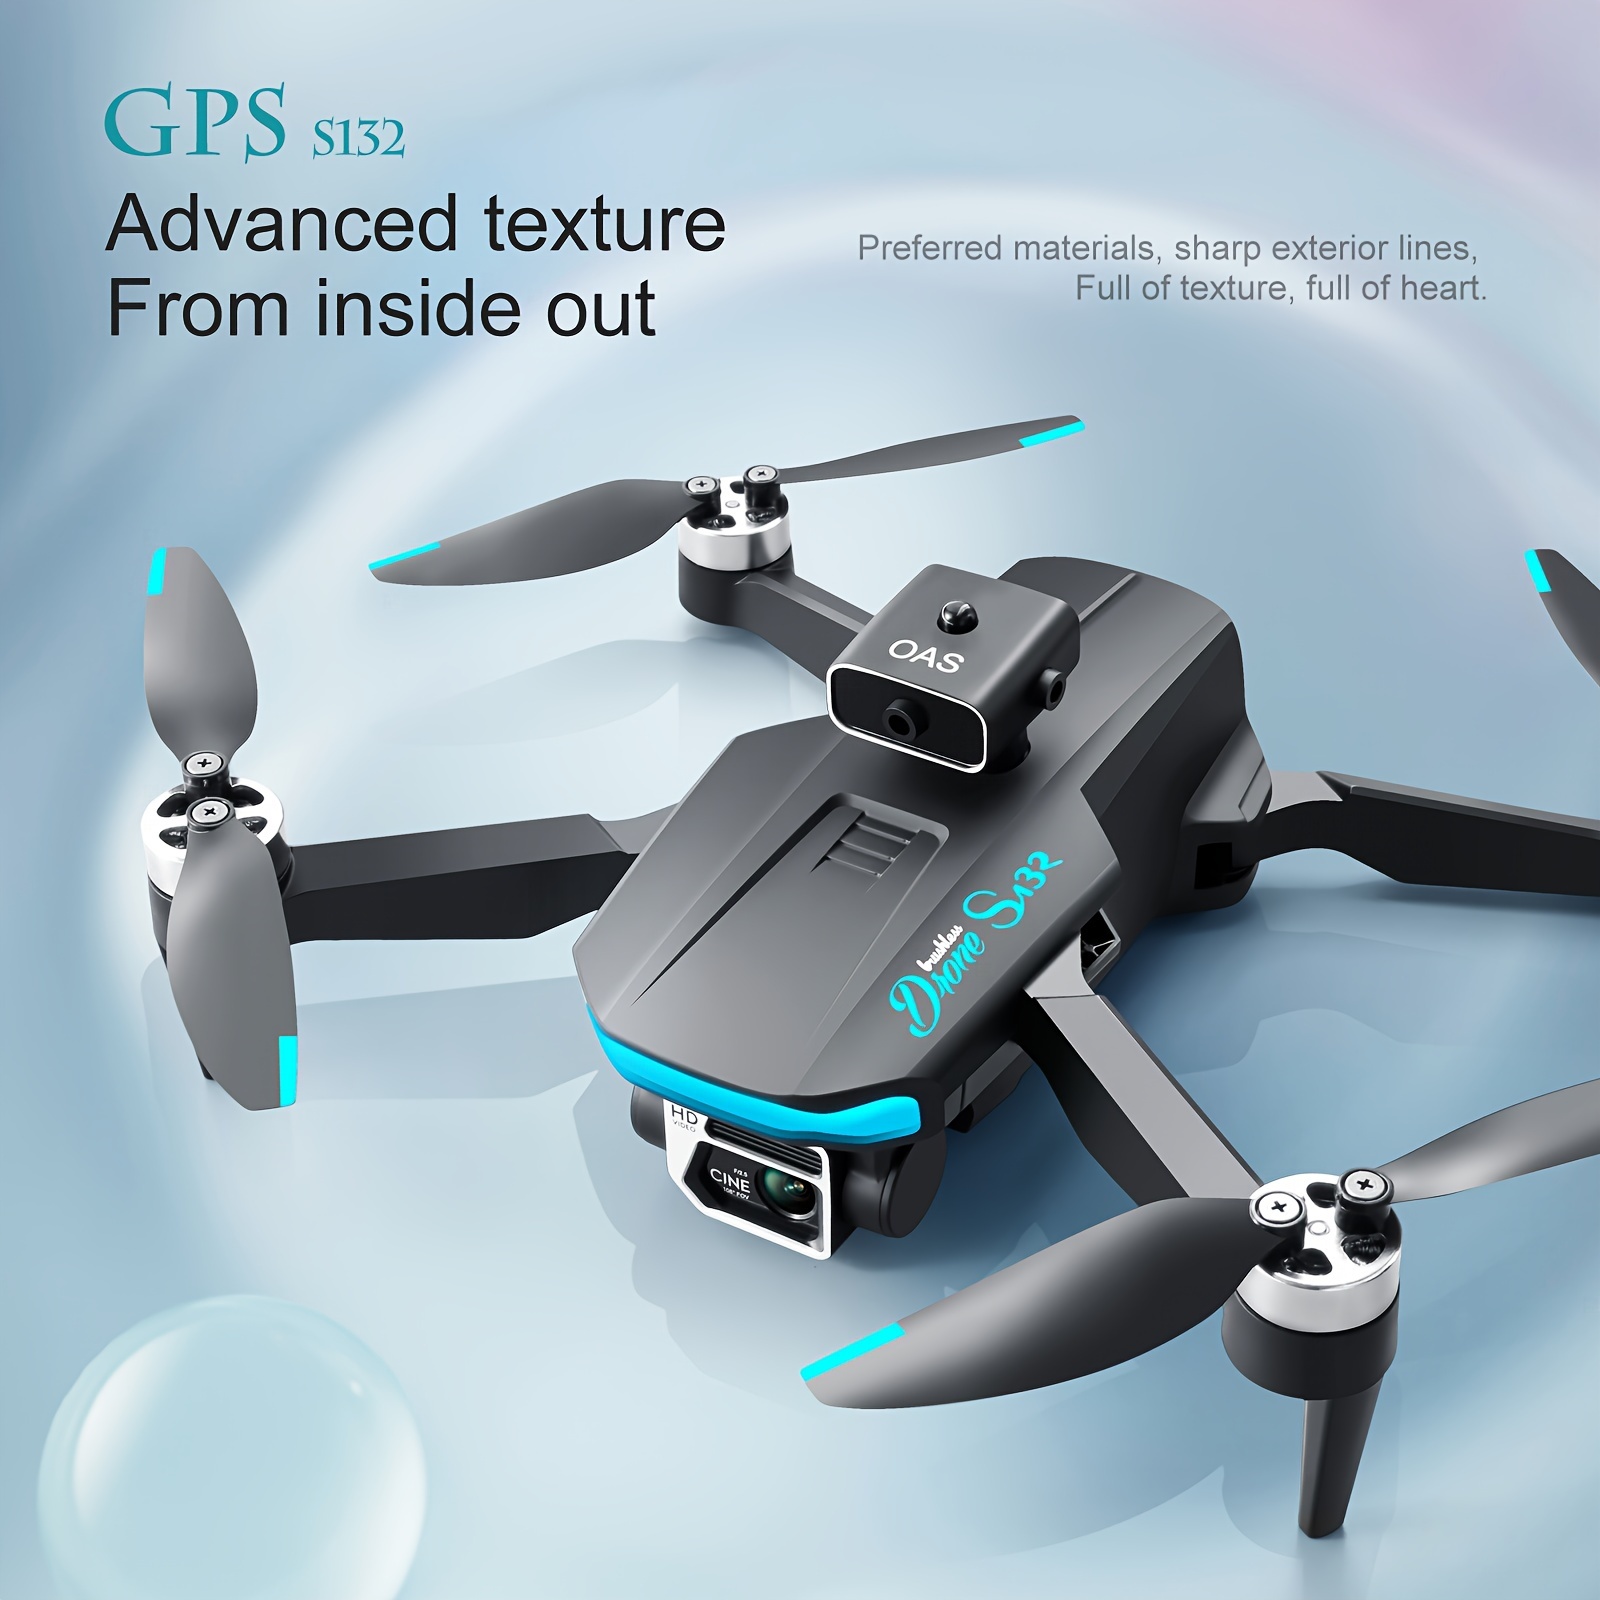 s132 drone hd camera gps global positioning optical flow fixed point hovering four sided infrared obstacle avoidance 90 electrically adjustable lens folding professional aerial photography uav details 4